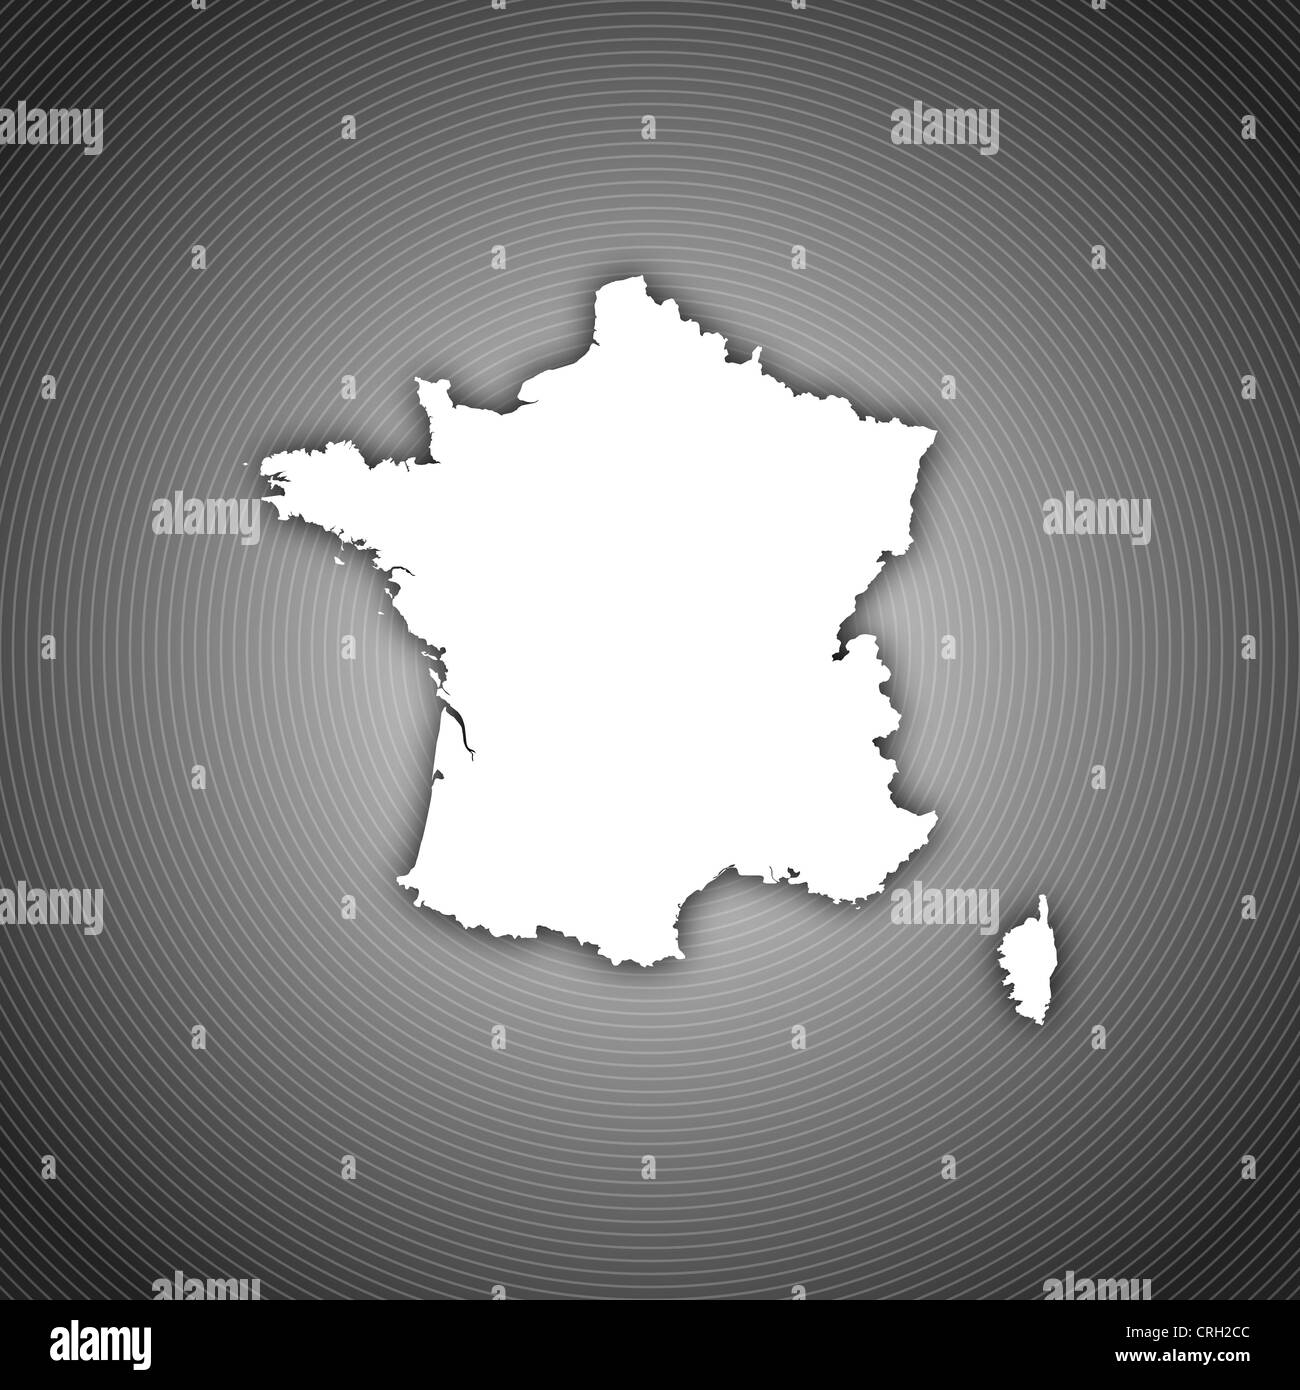 Political map of France with the several regions. Stock Photo